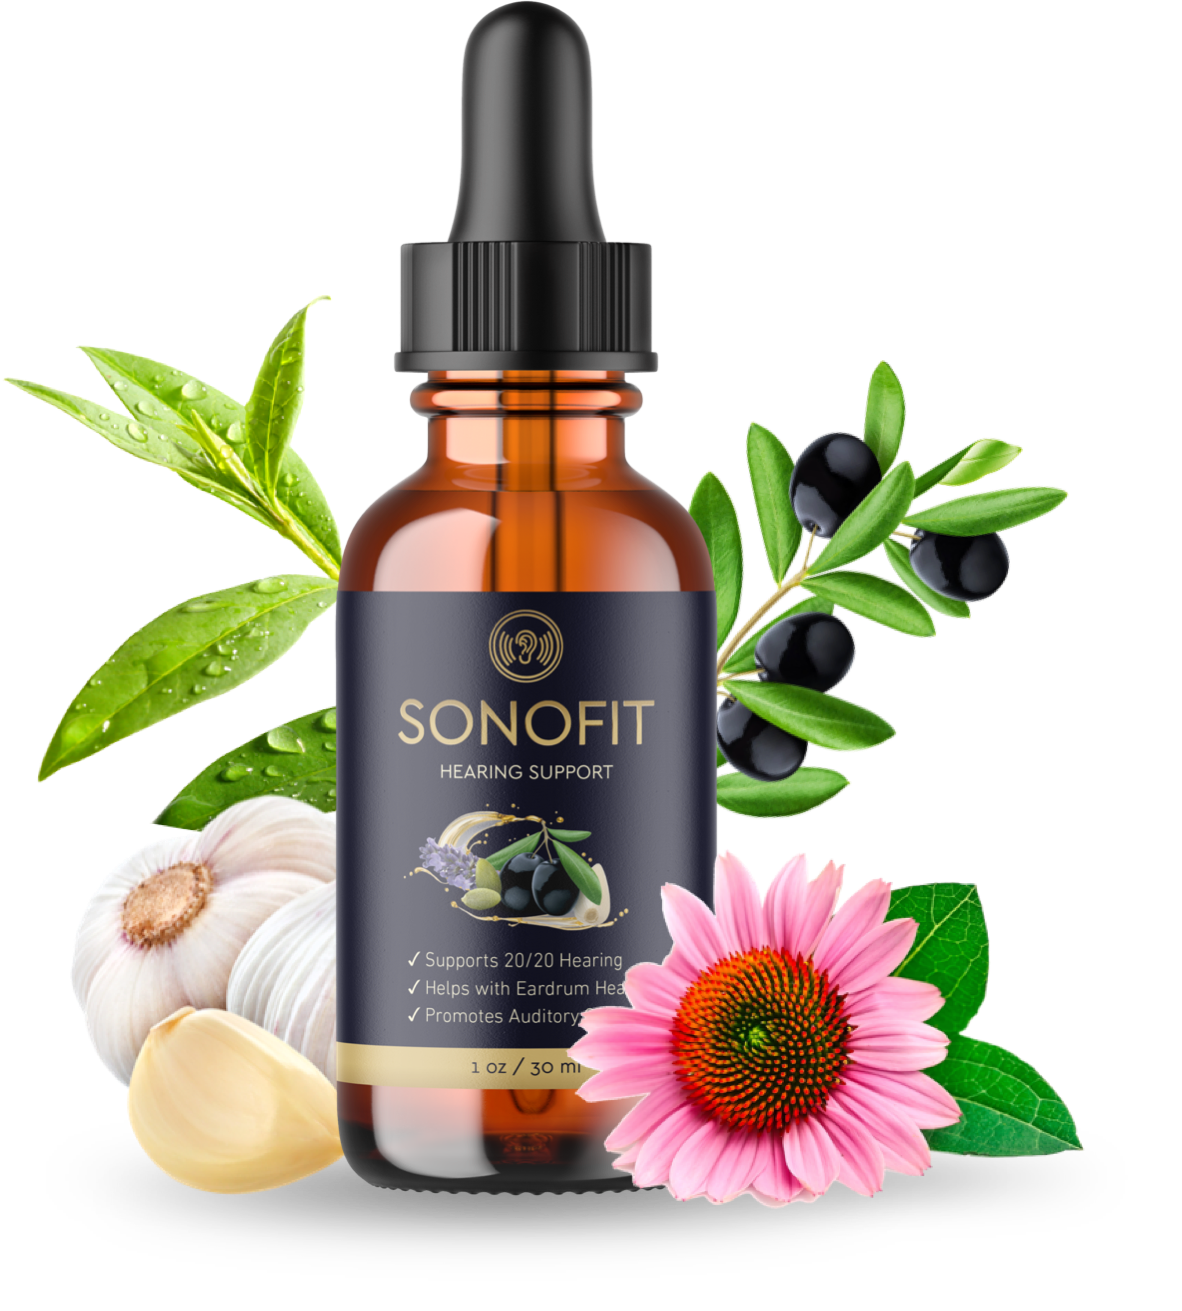 Get your Sonofit hearing supplement now at a discounted price with limited-time offer